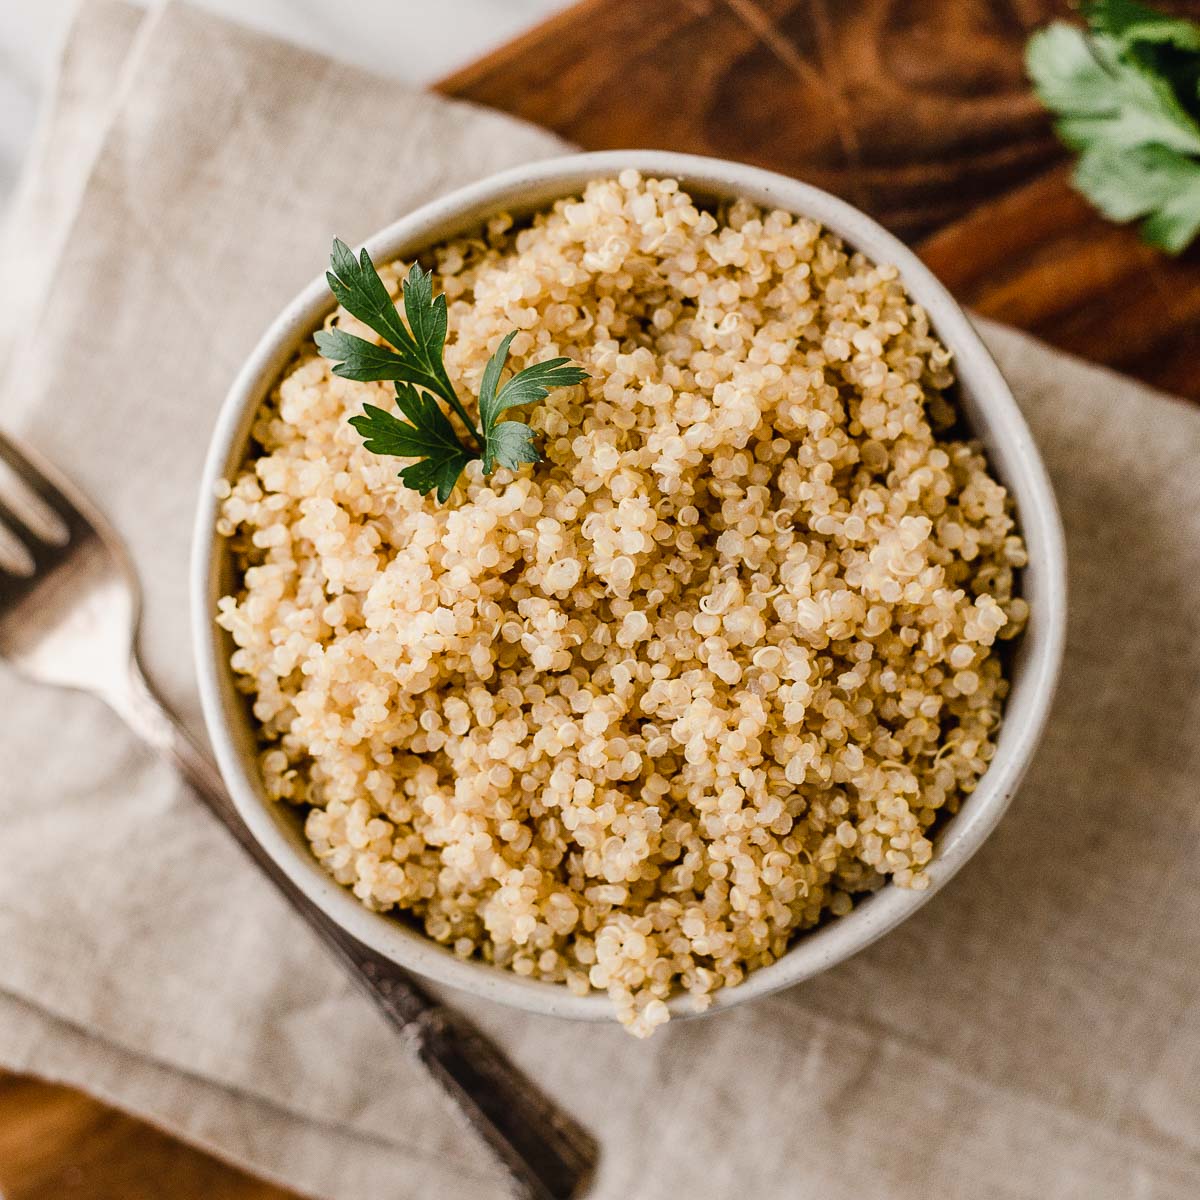 Instant Pot Quinoa in a bowl on a counter.